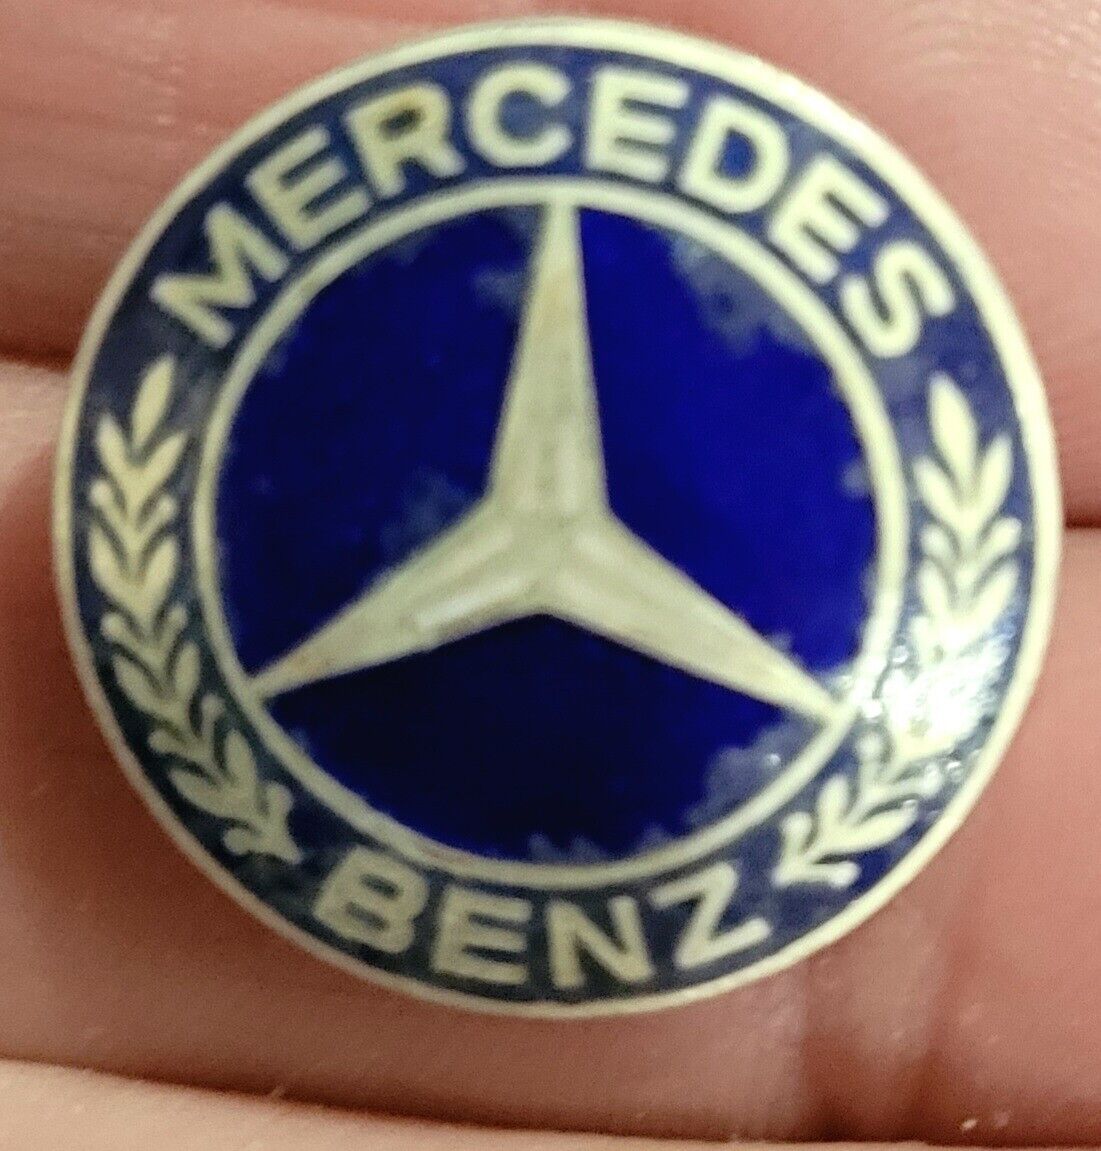 VINTAGE MERCEDES-BENZ LAPEL PIN MADE IN WEST GERMANY